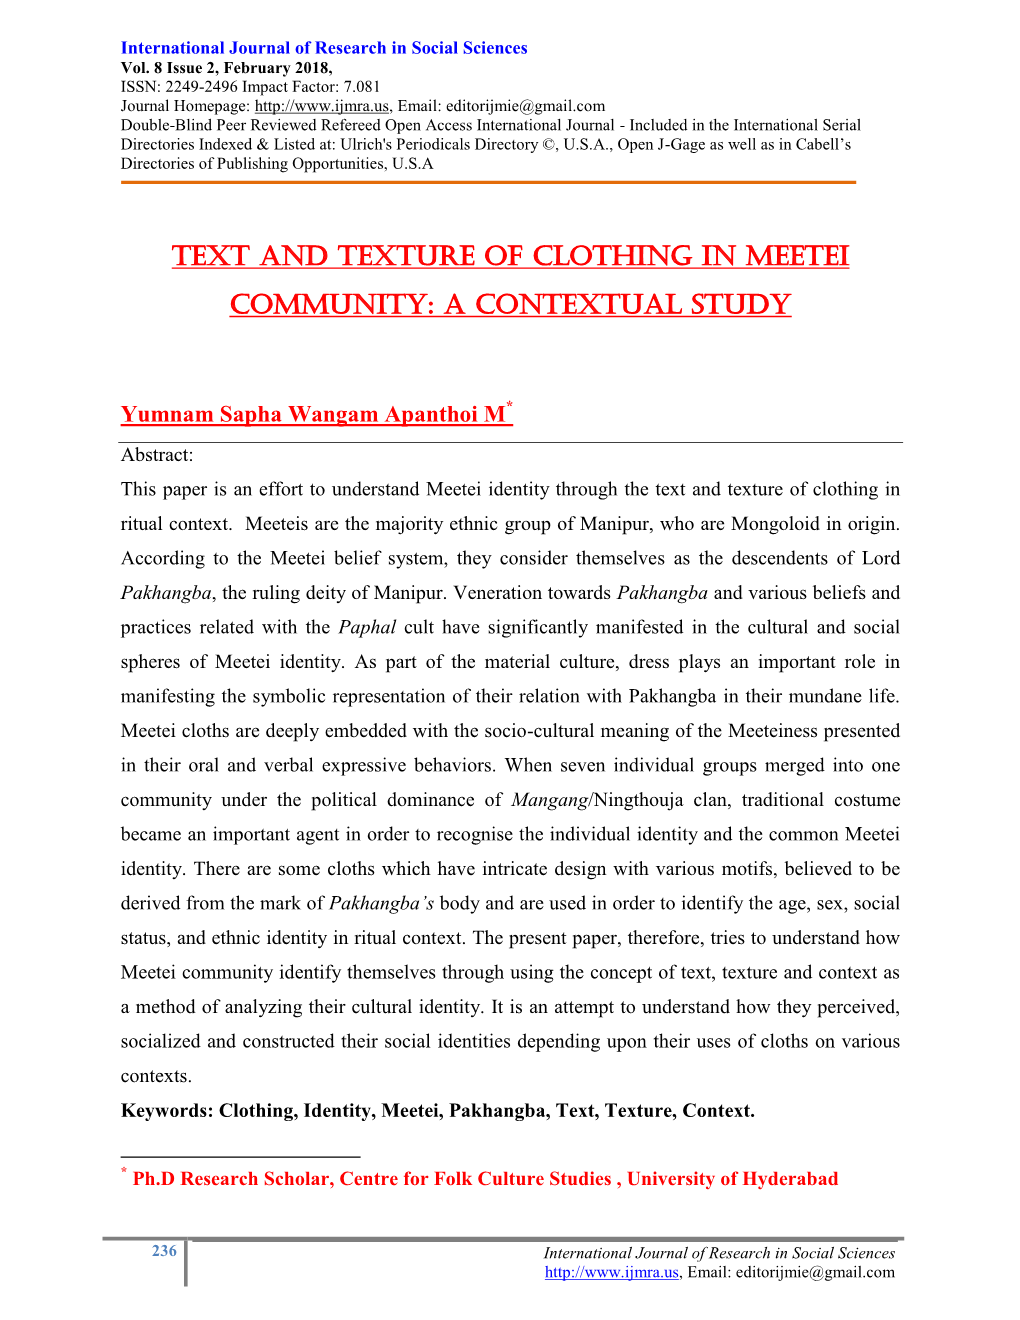 Text and Texture of Clothing in Meetei Community: a Contextual Study